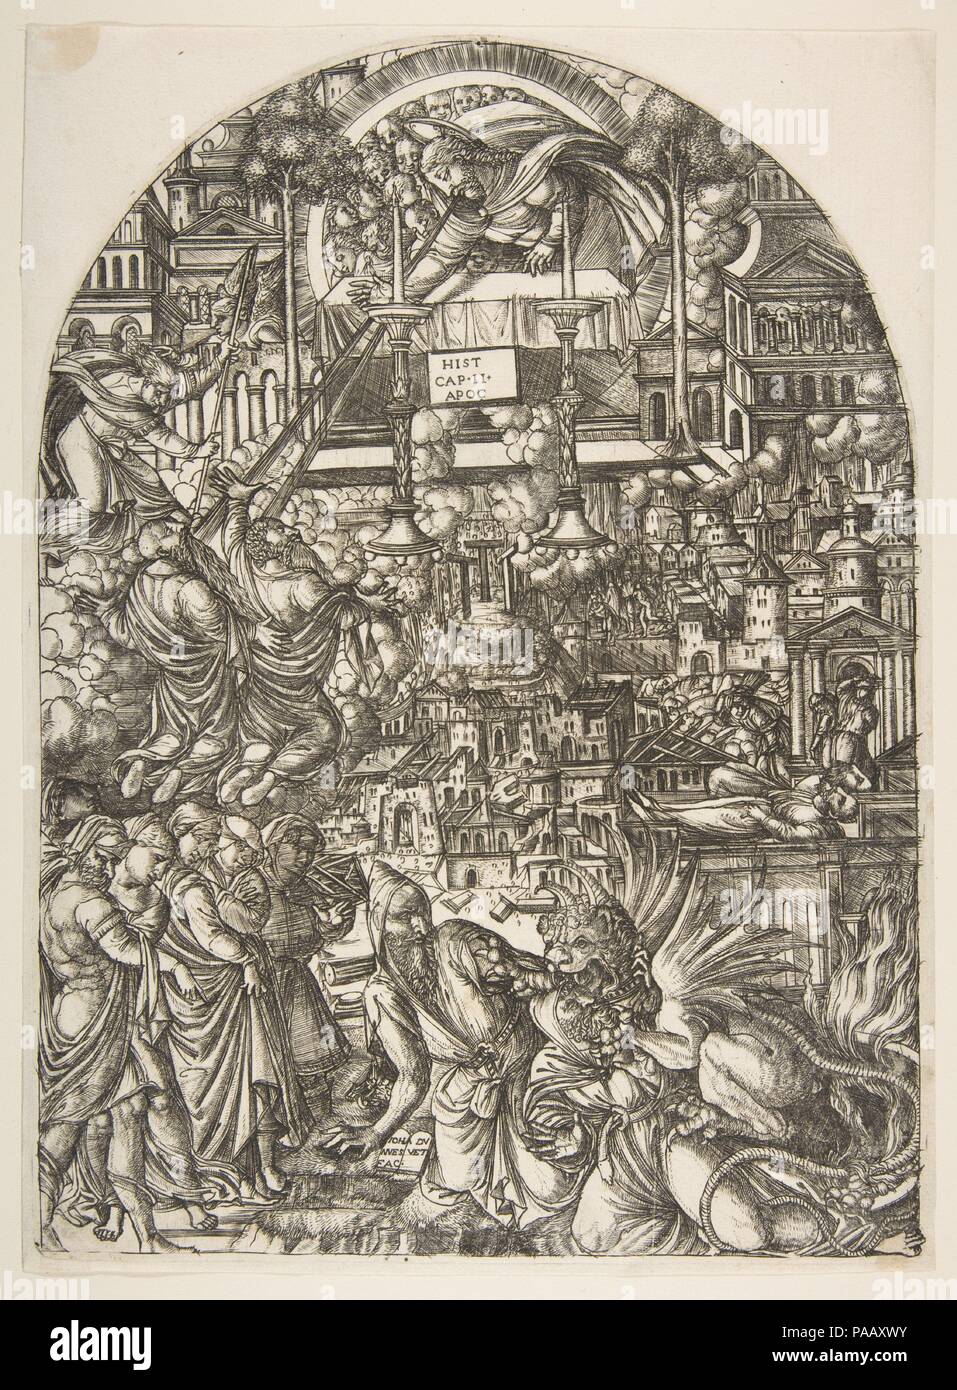 The Measurement of the Temple, from the Apocalypse. Artist: Jean Duvet  (French, ca. 1485-after 1561). Dimensions: plate: 12 1/16 x 8 3/4 in. (30.7  x 22.3 cm) sheet: 12 5/16 x 9